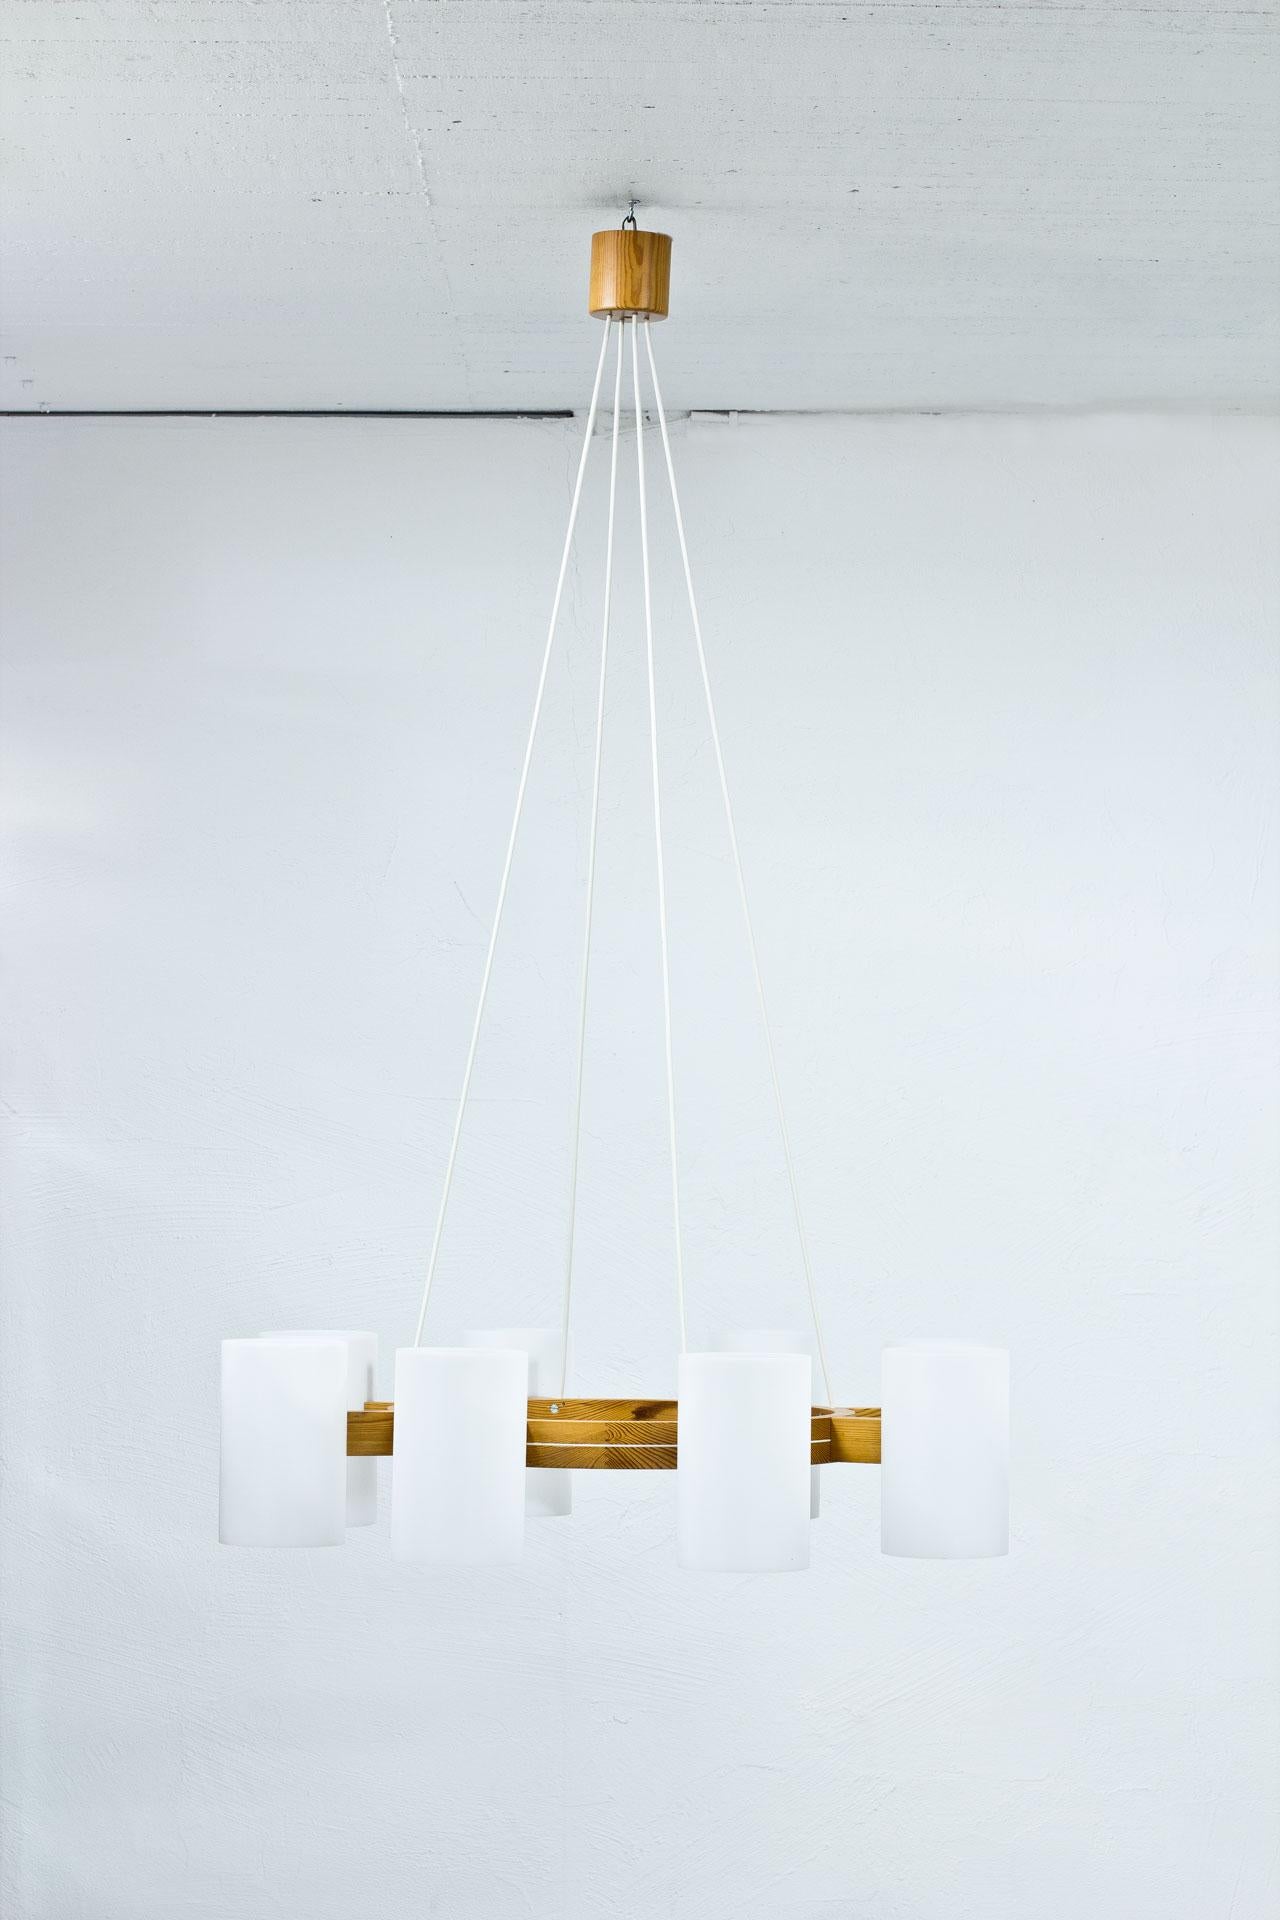 Large chandelier designed by Uno & Östen Kristiansson for their own company Luxus in
Sweden during the 1960s. Solid pine structure with large acrylic diffusers.
Adjustable height according to preference.